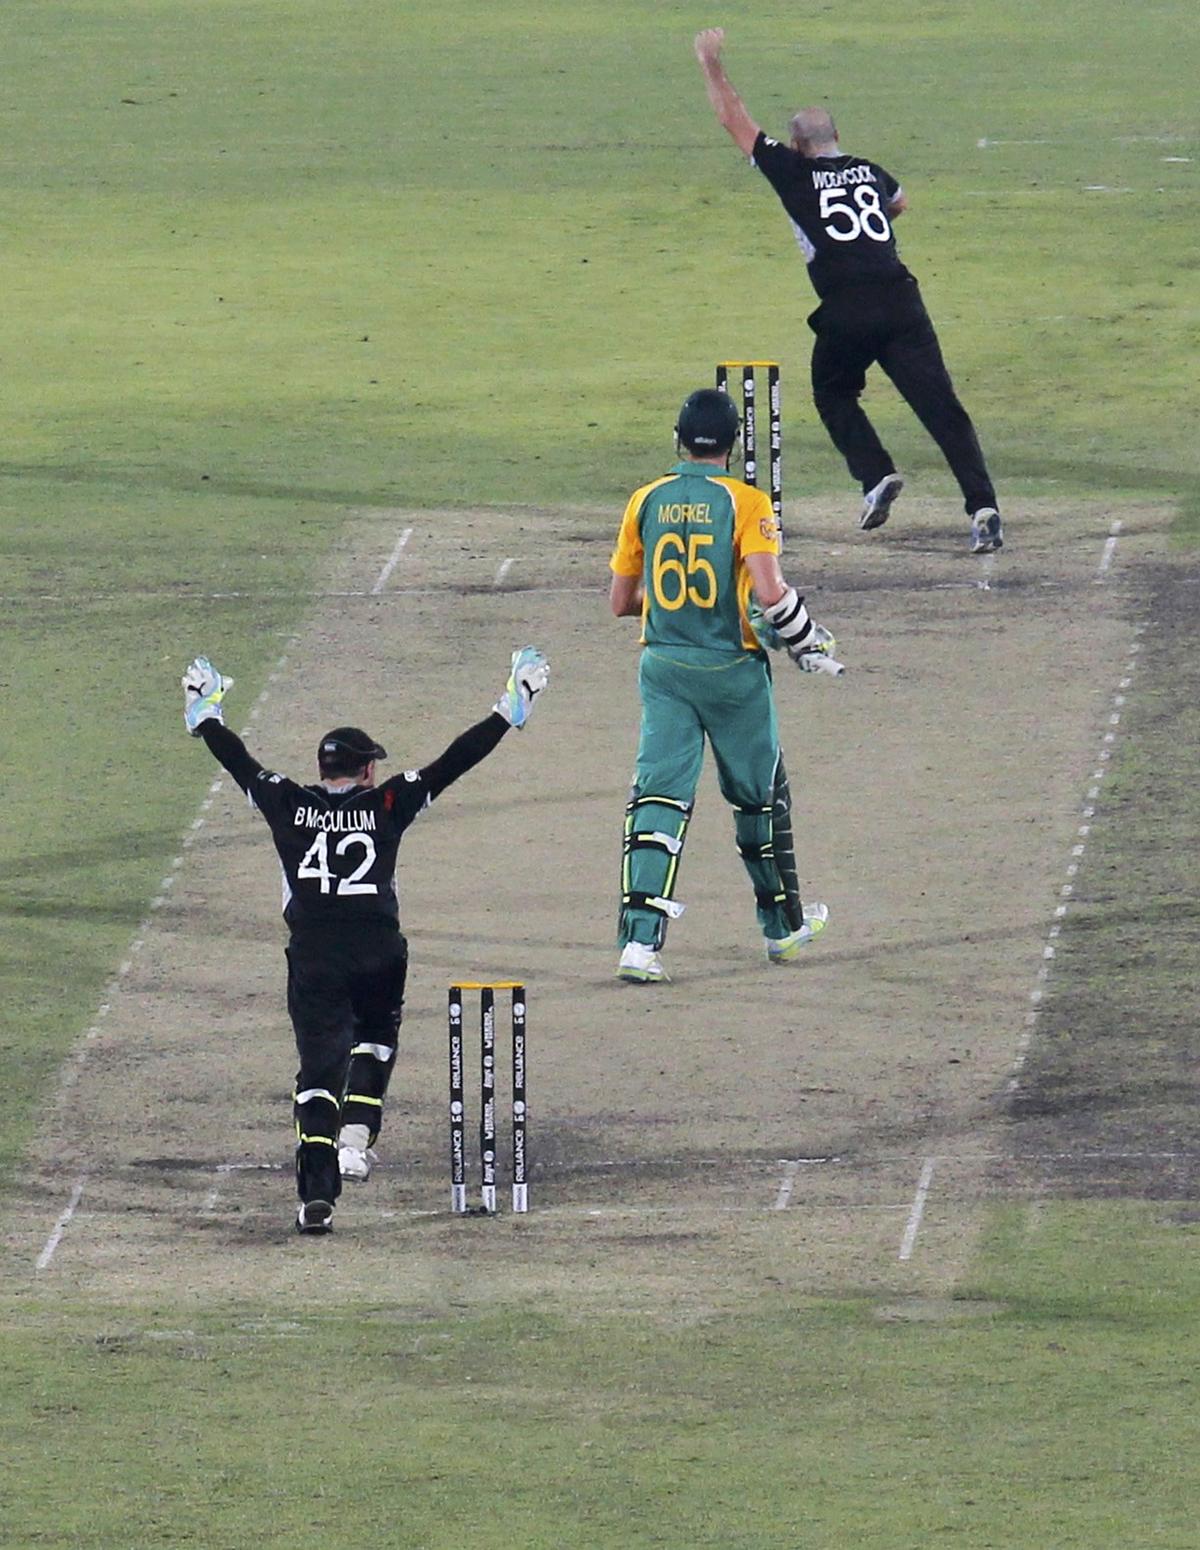 New Zealand’s Luke Woodcock and Brendon McCullum (L) celebrate taking the wicket of South Africa’s Morne Morkel to win their Cricket World Cup quarterfinal match in Dhaka March 25, 2011.   